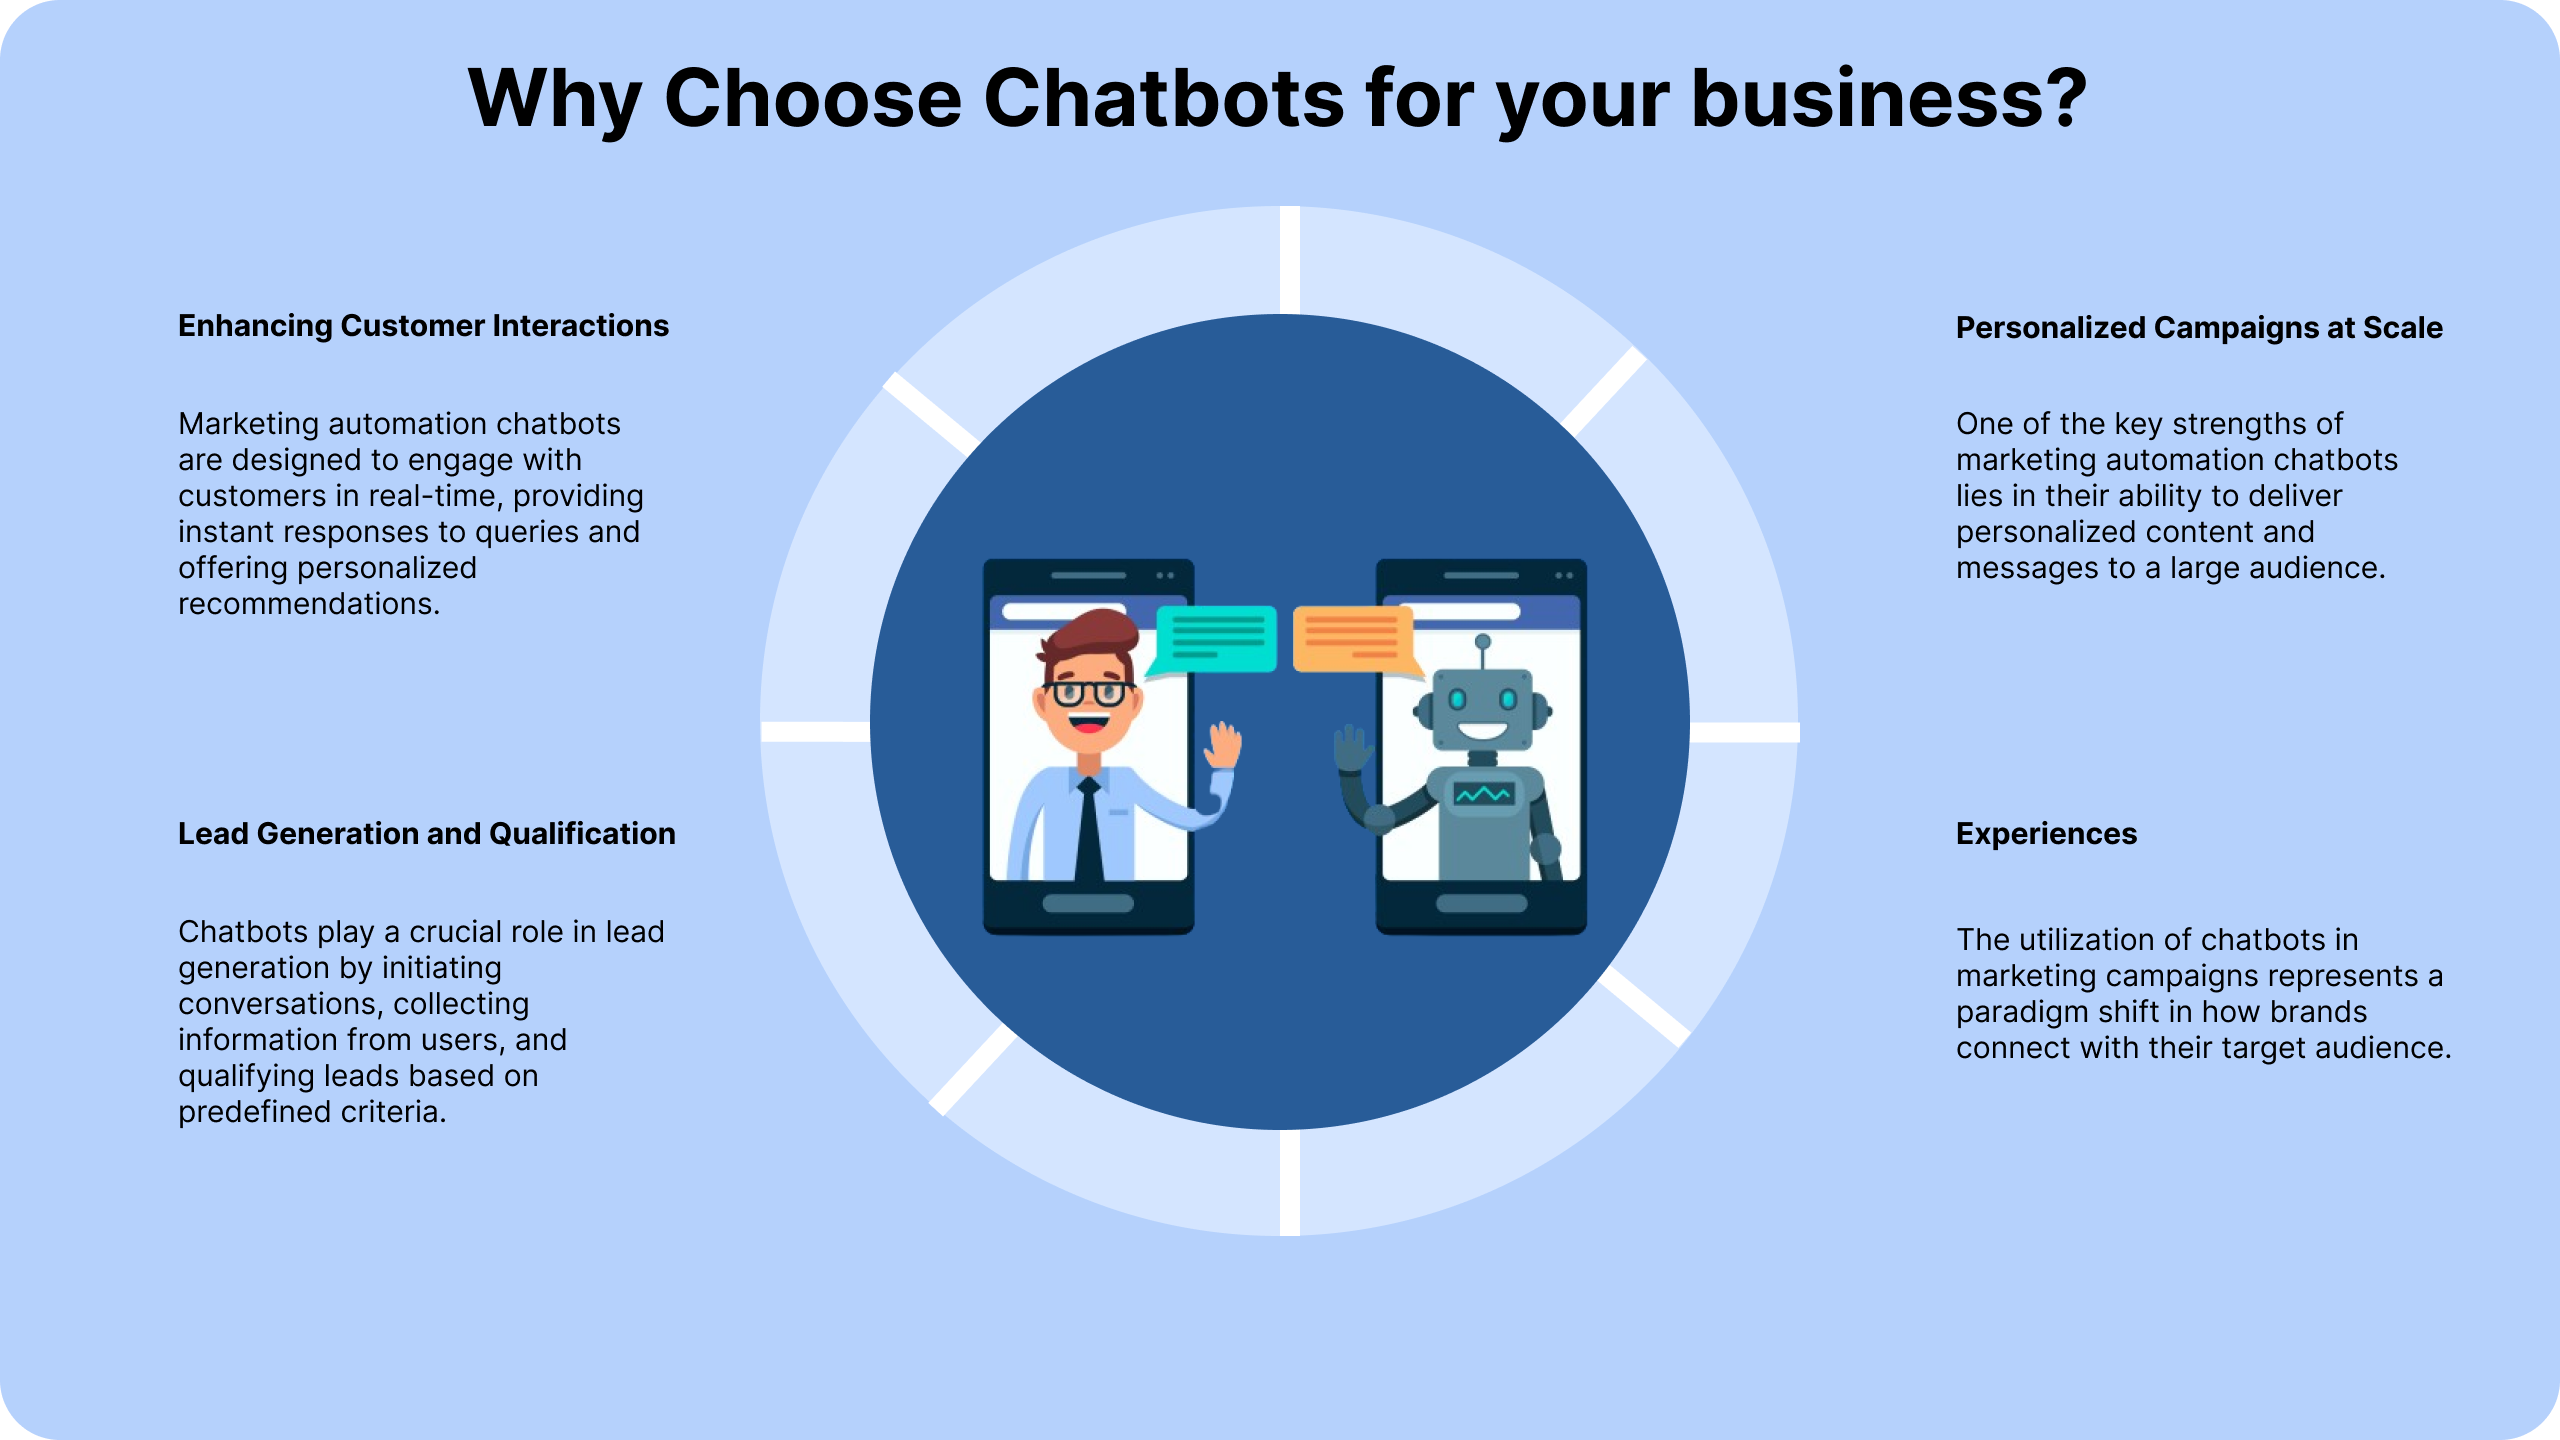 Why should you use chatbots for your business